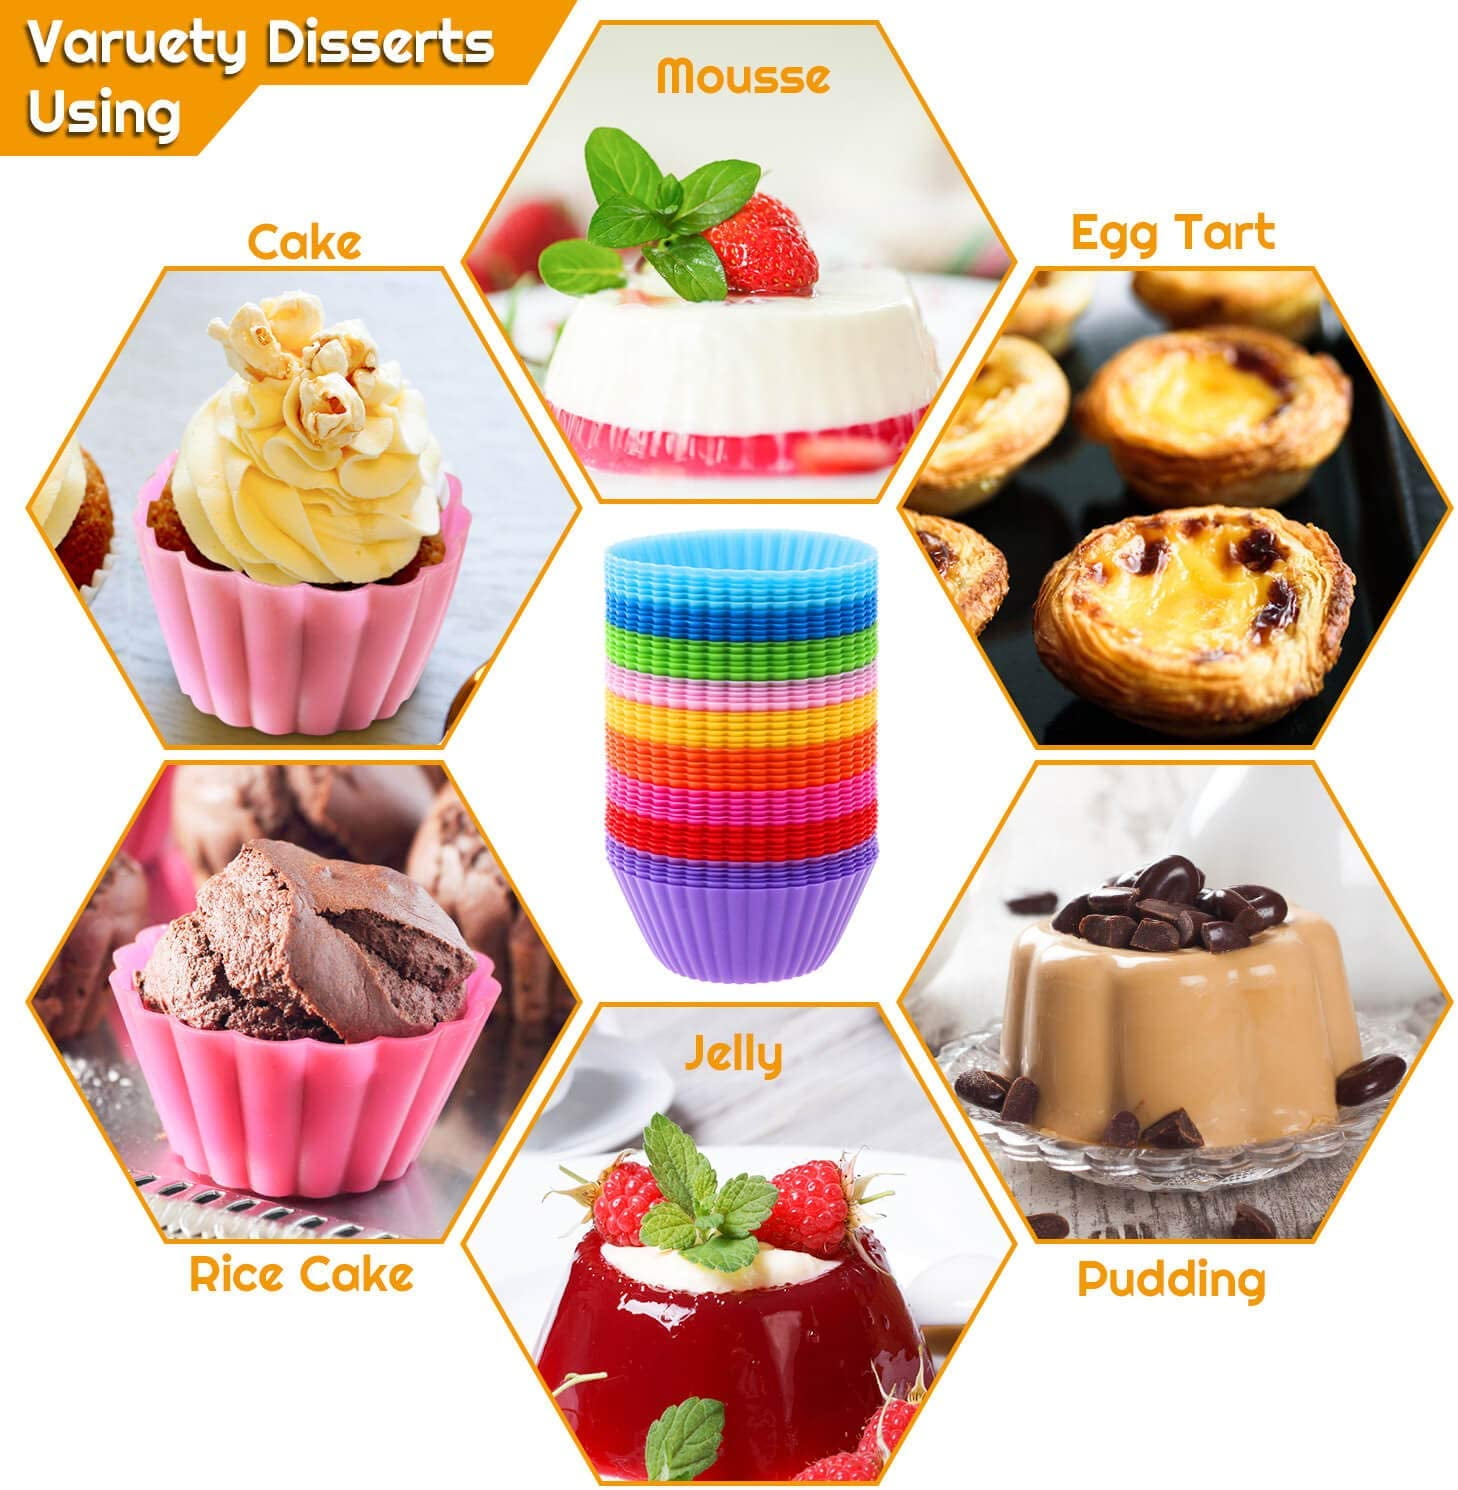 24pcs Silicone Molds Cupcake and Dessert Decorating Pen with Piping Tips,  Reusable Non-Stick Cupcake Mold for Kitchen Baking(Silicone Cake Molds)